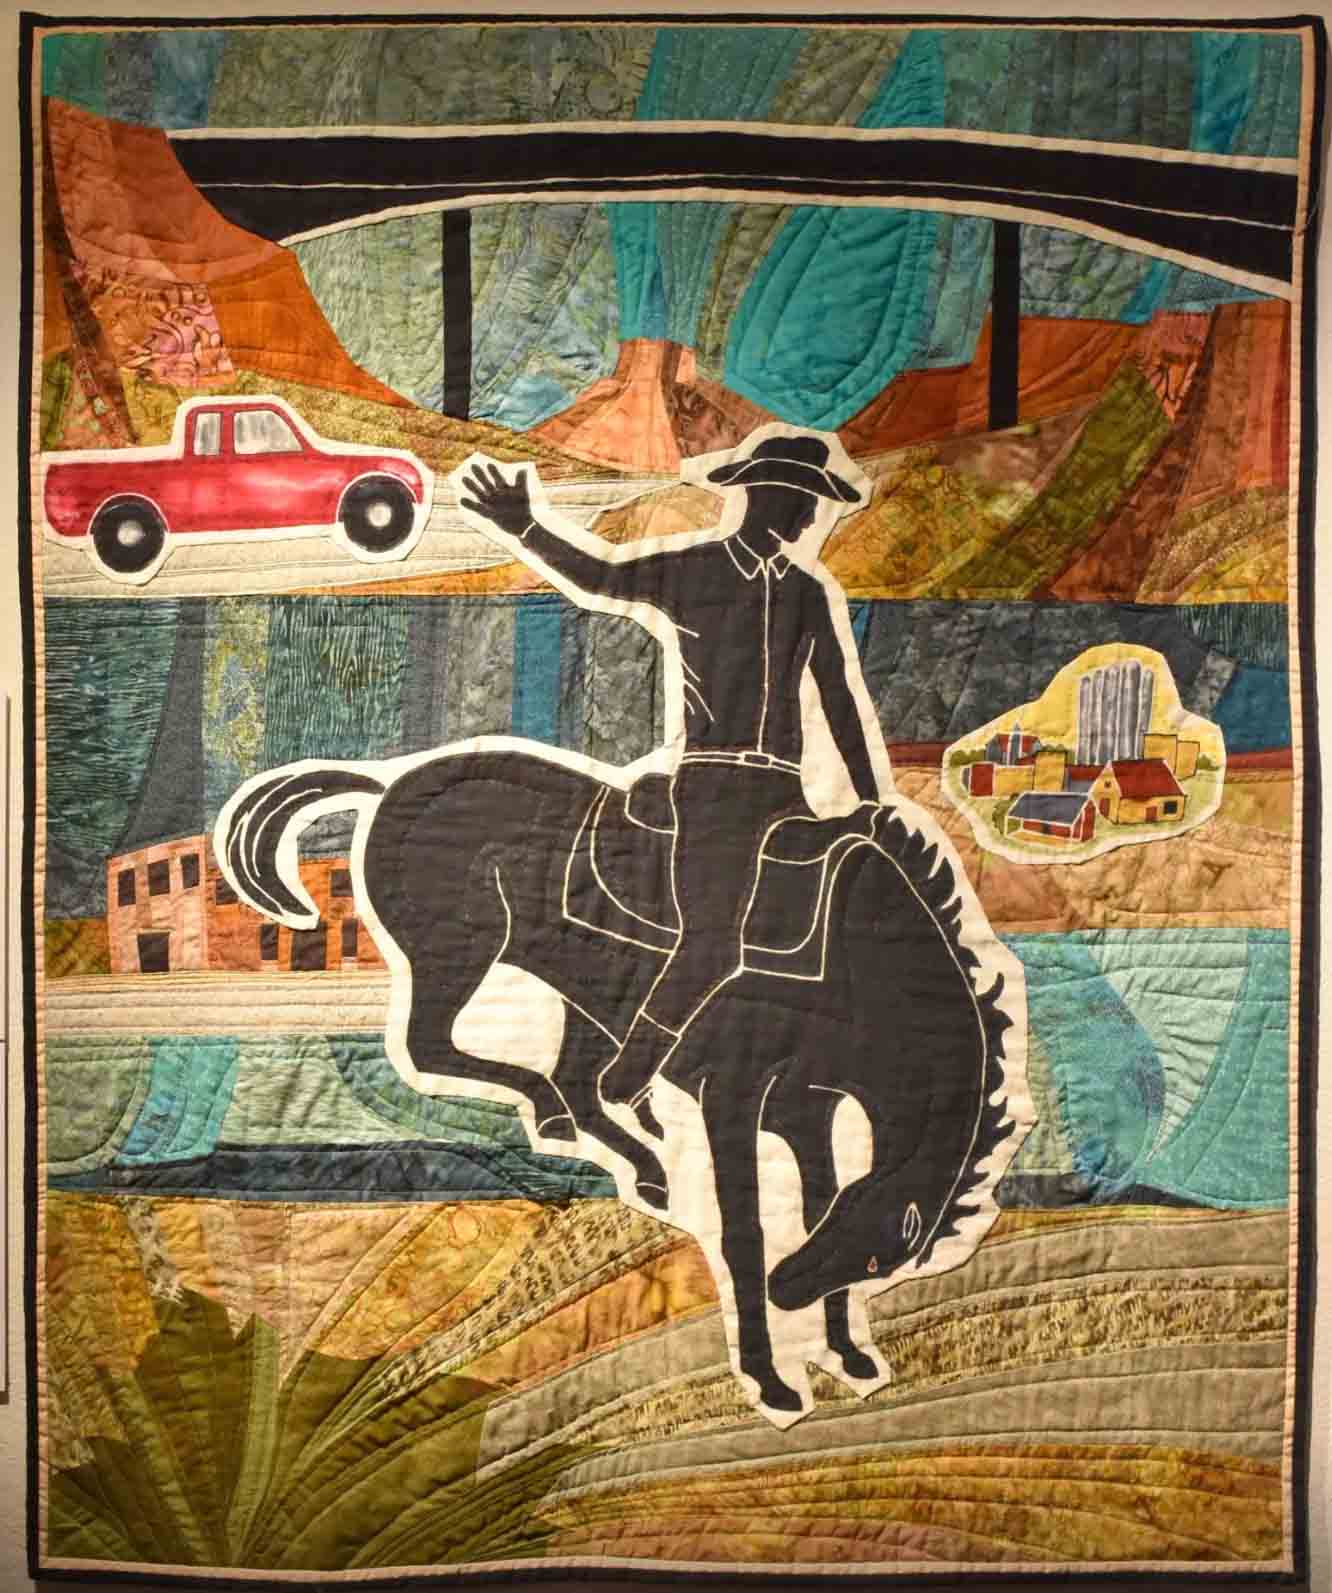 Art quilt in west Texas colors with cowboy on bucking bronco horse and red pick up truck